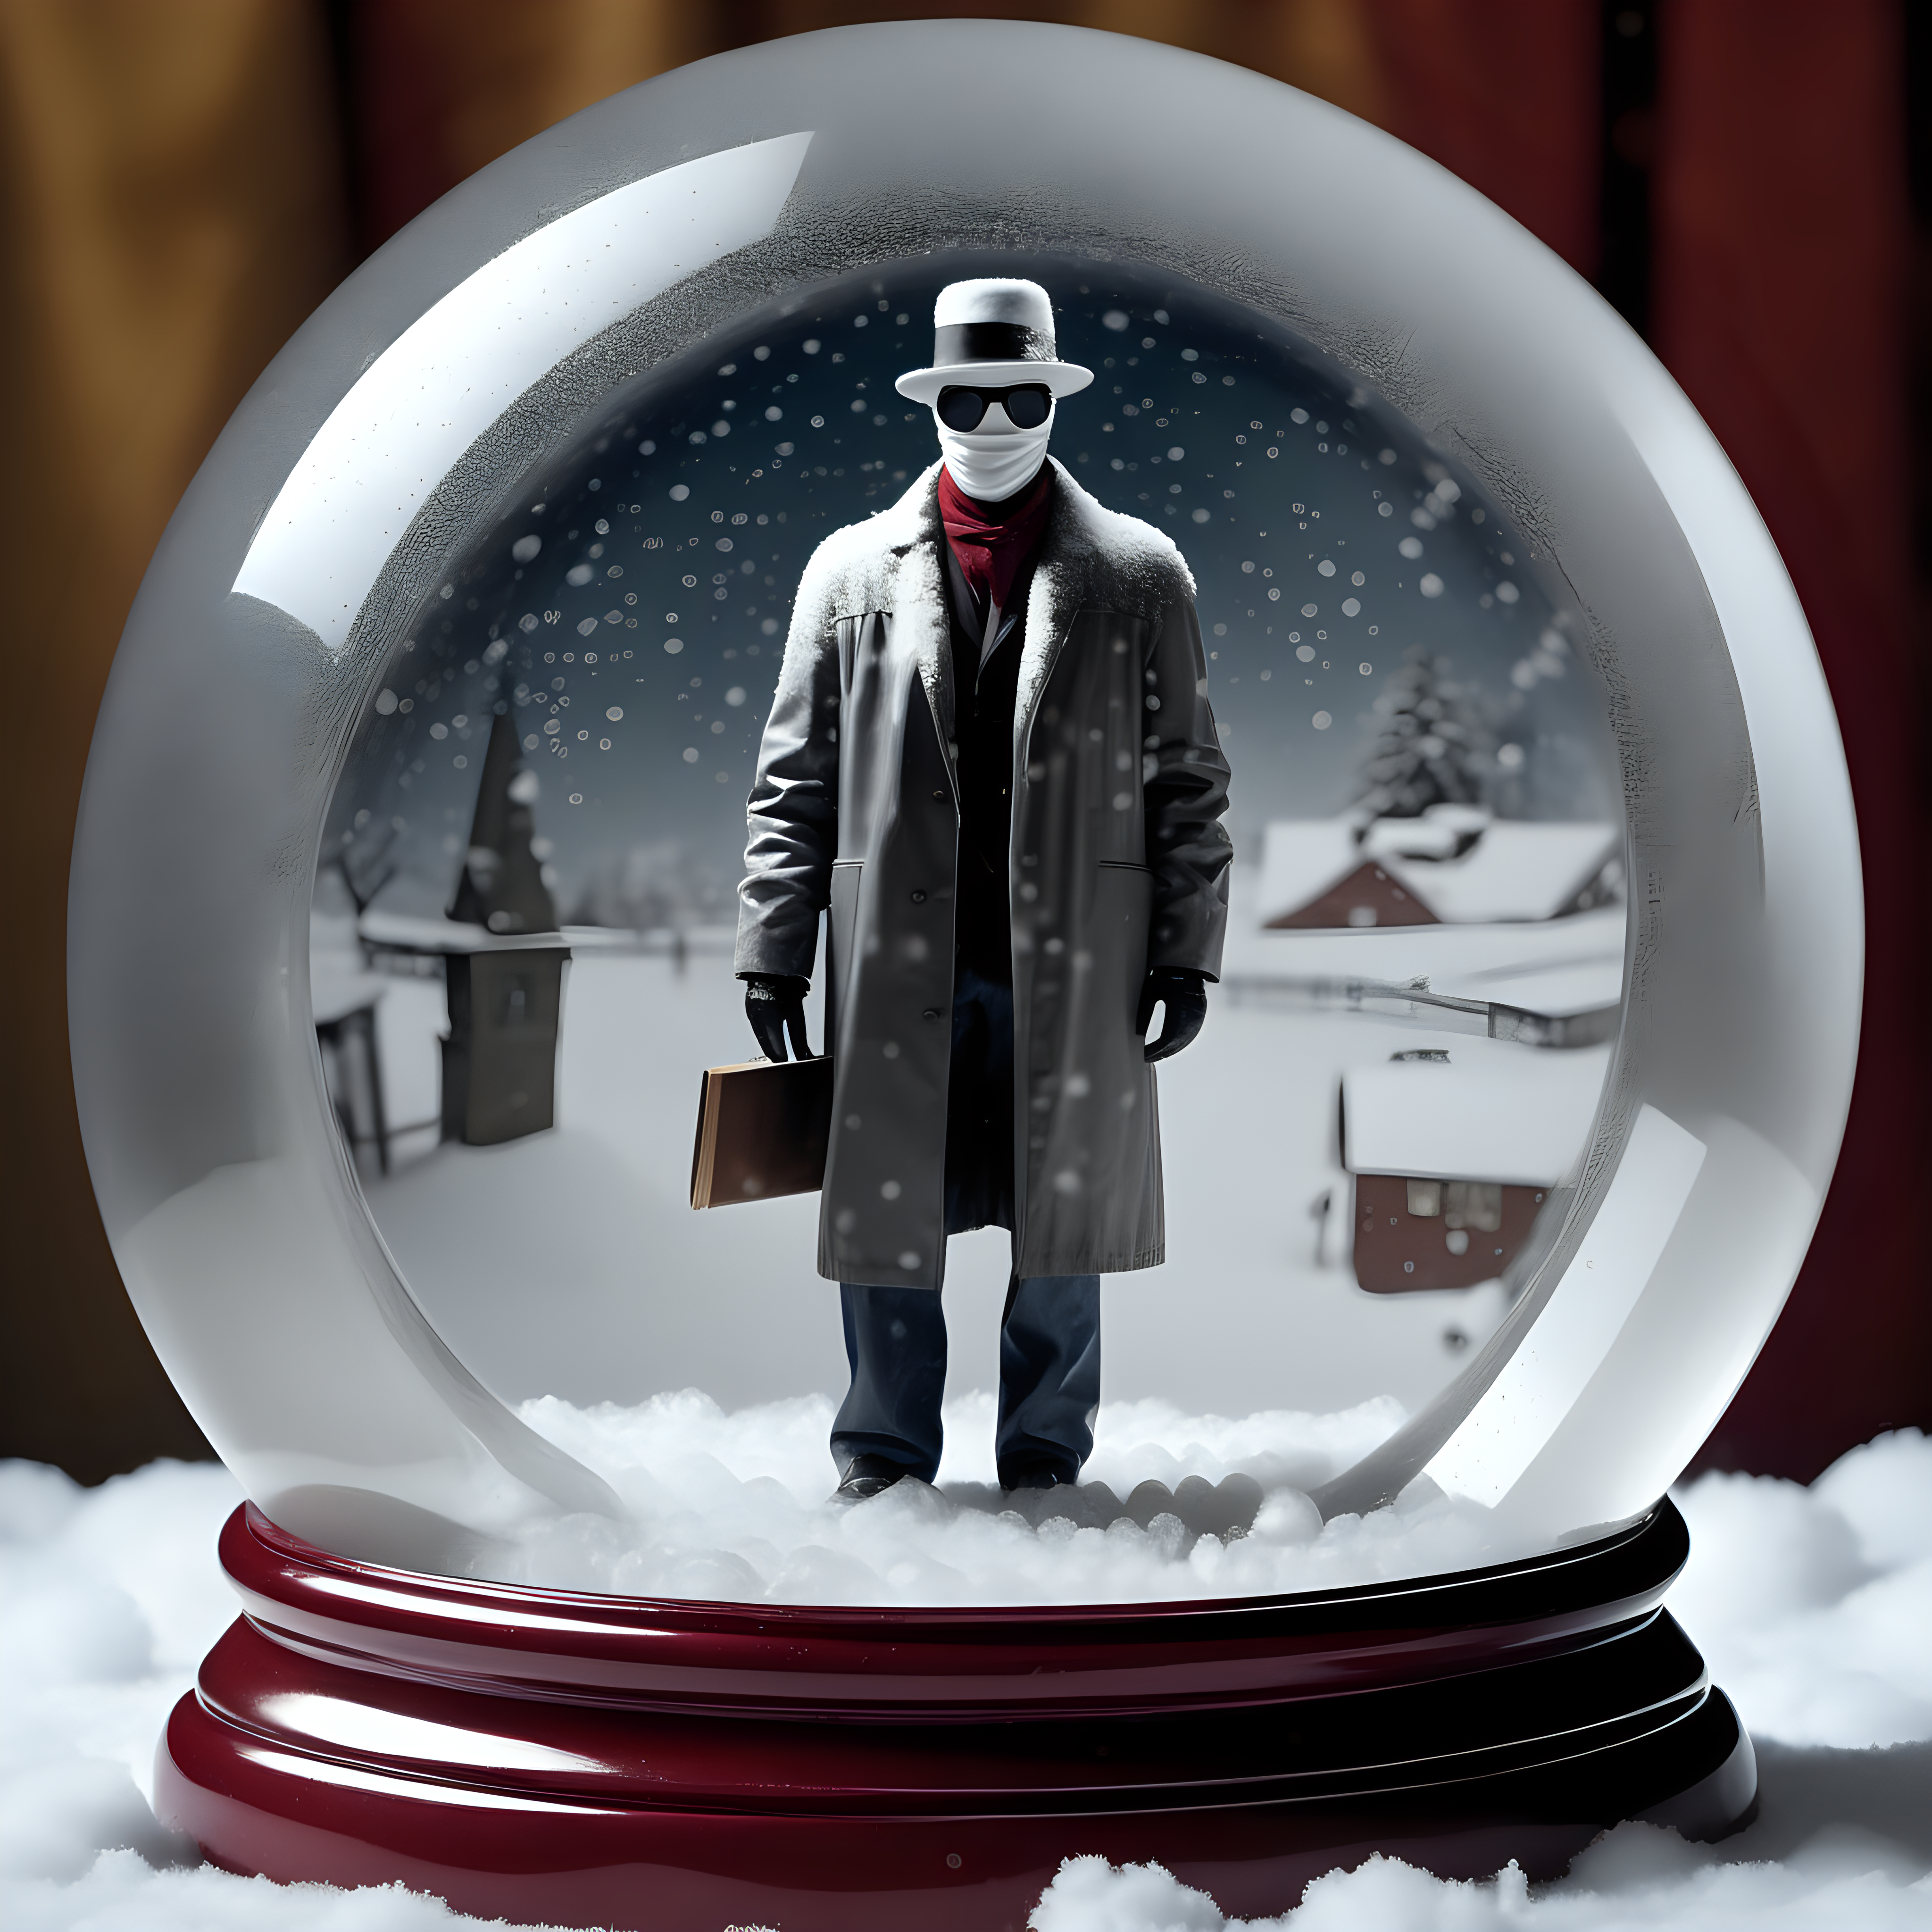 The Invisible Man in a snow globe